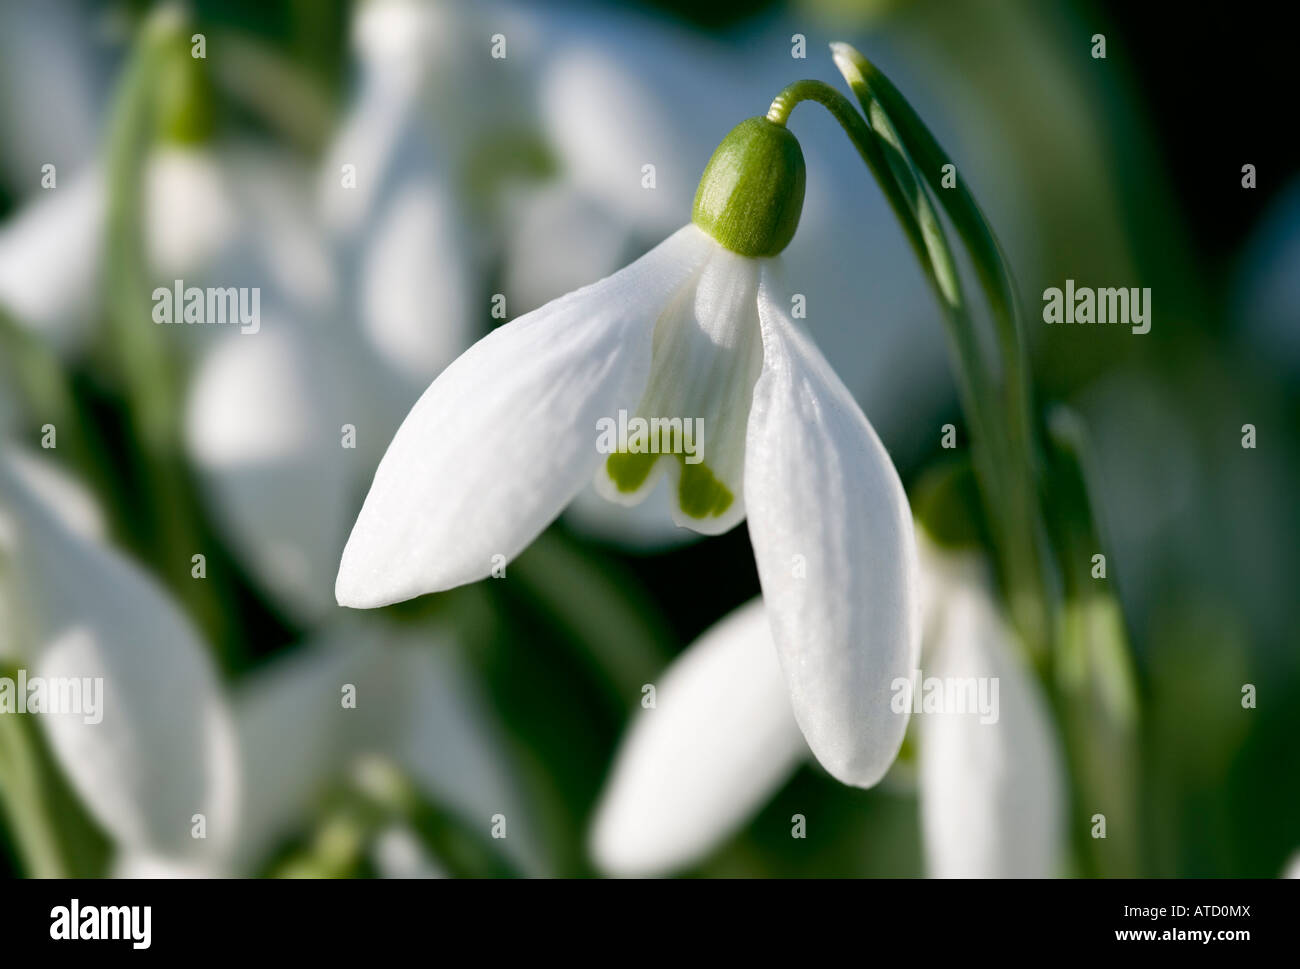 Snowdrops shot in natural environment in late winter.  LATIN NAME: Galanthus Stock Photo